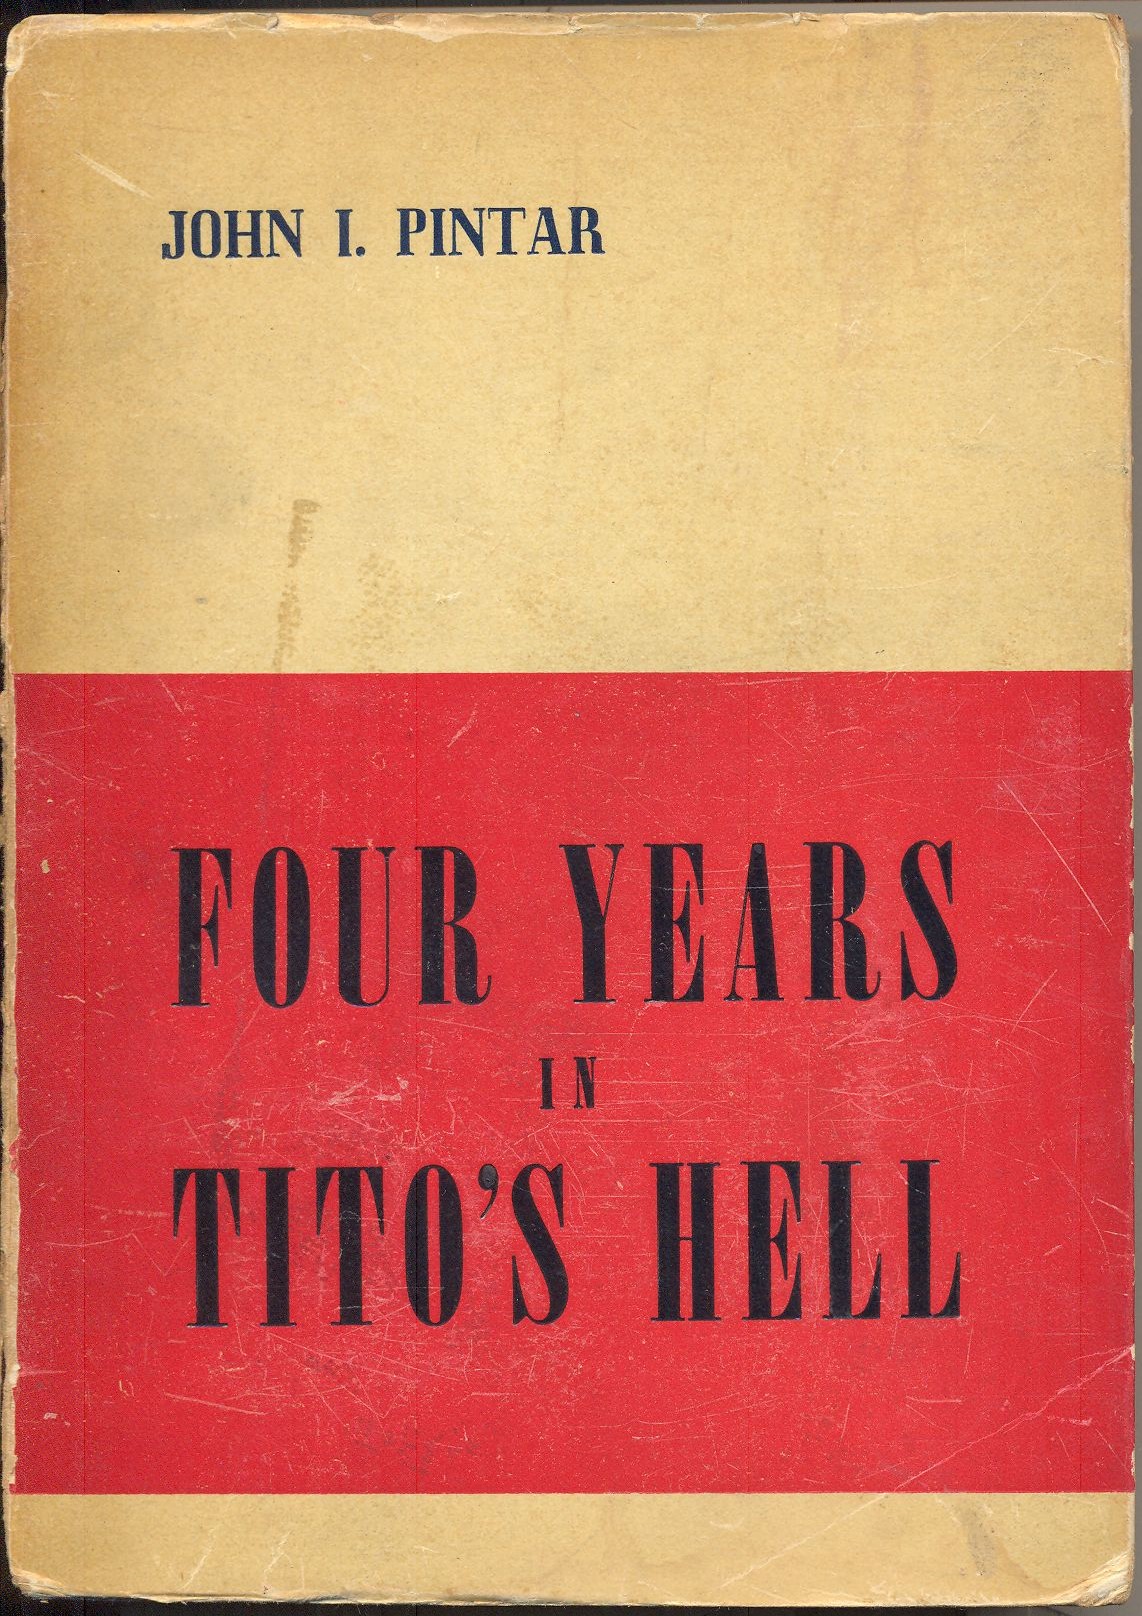 John Pintar. Four years in Tito’s hell, 1954. Book cover